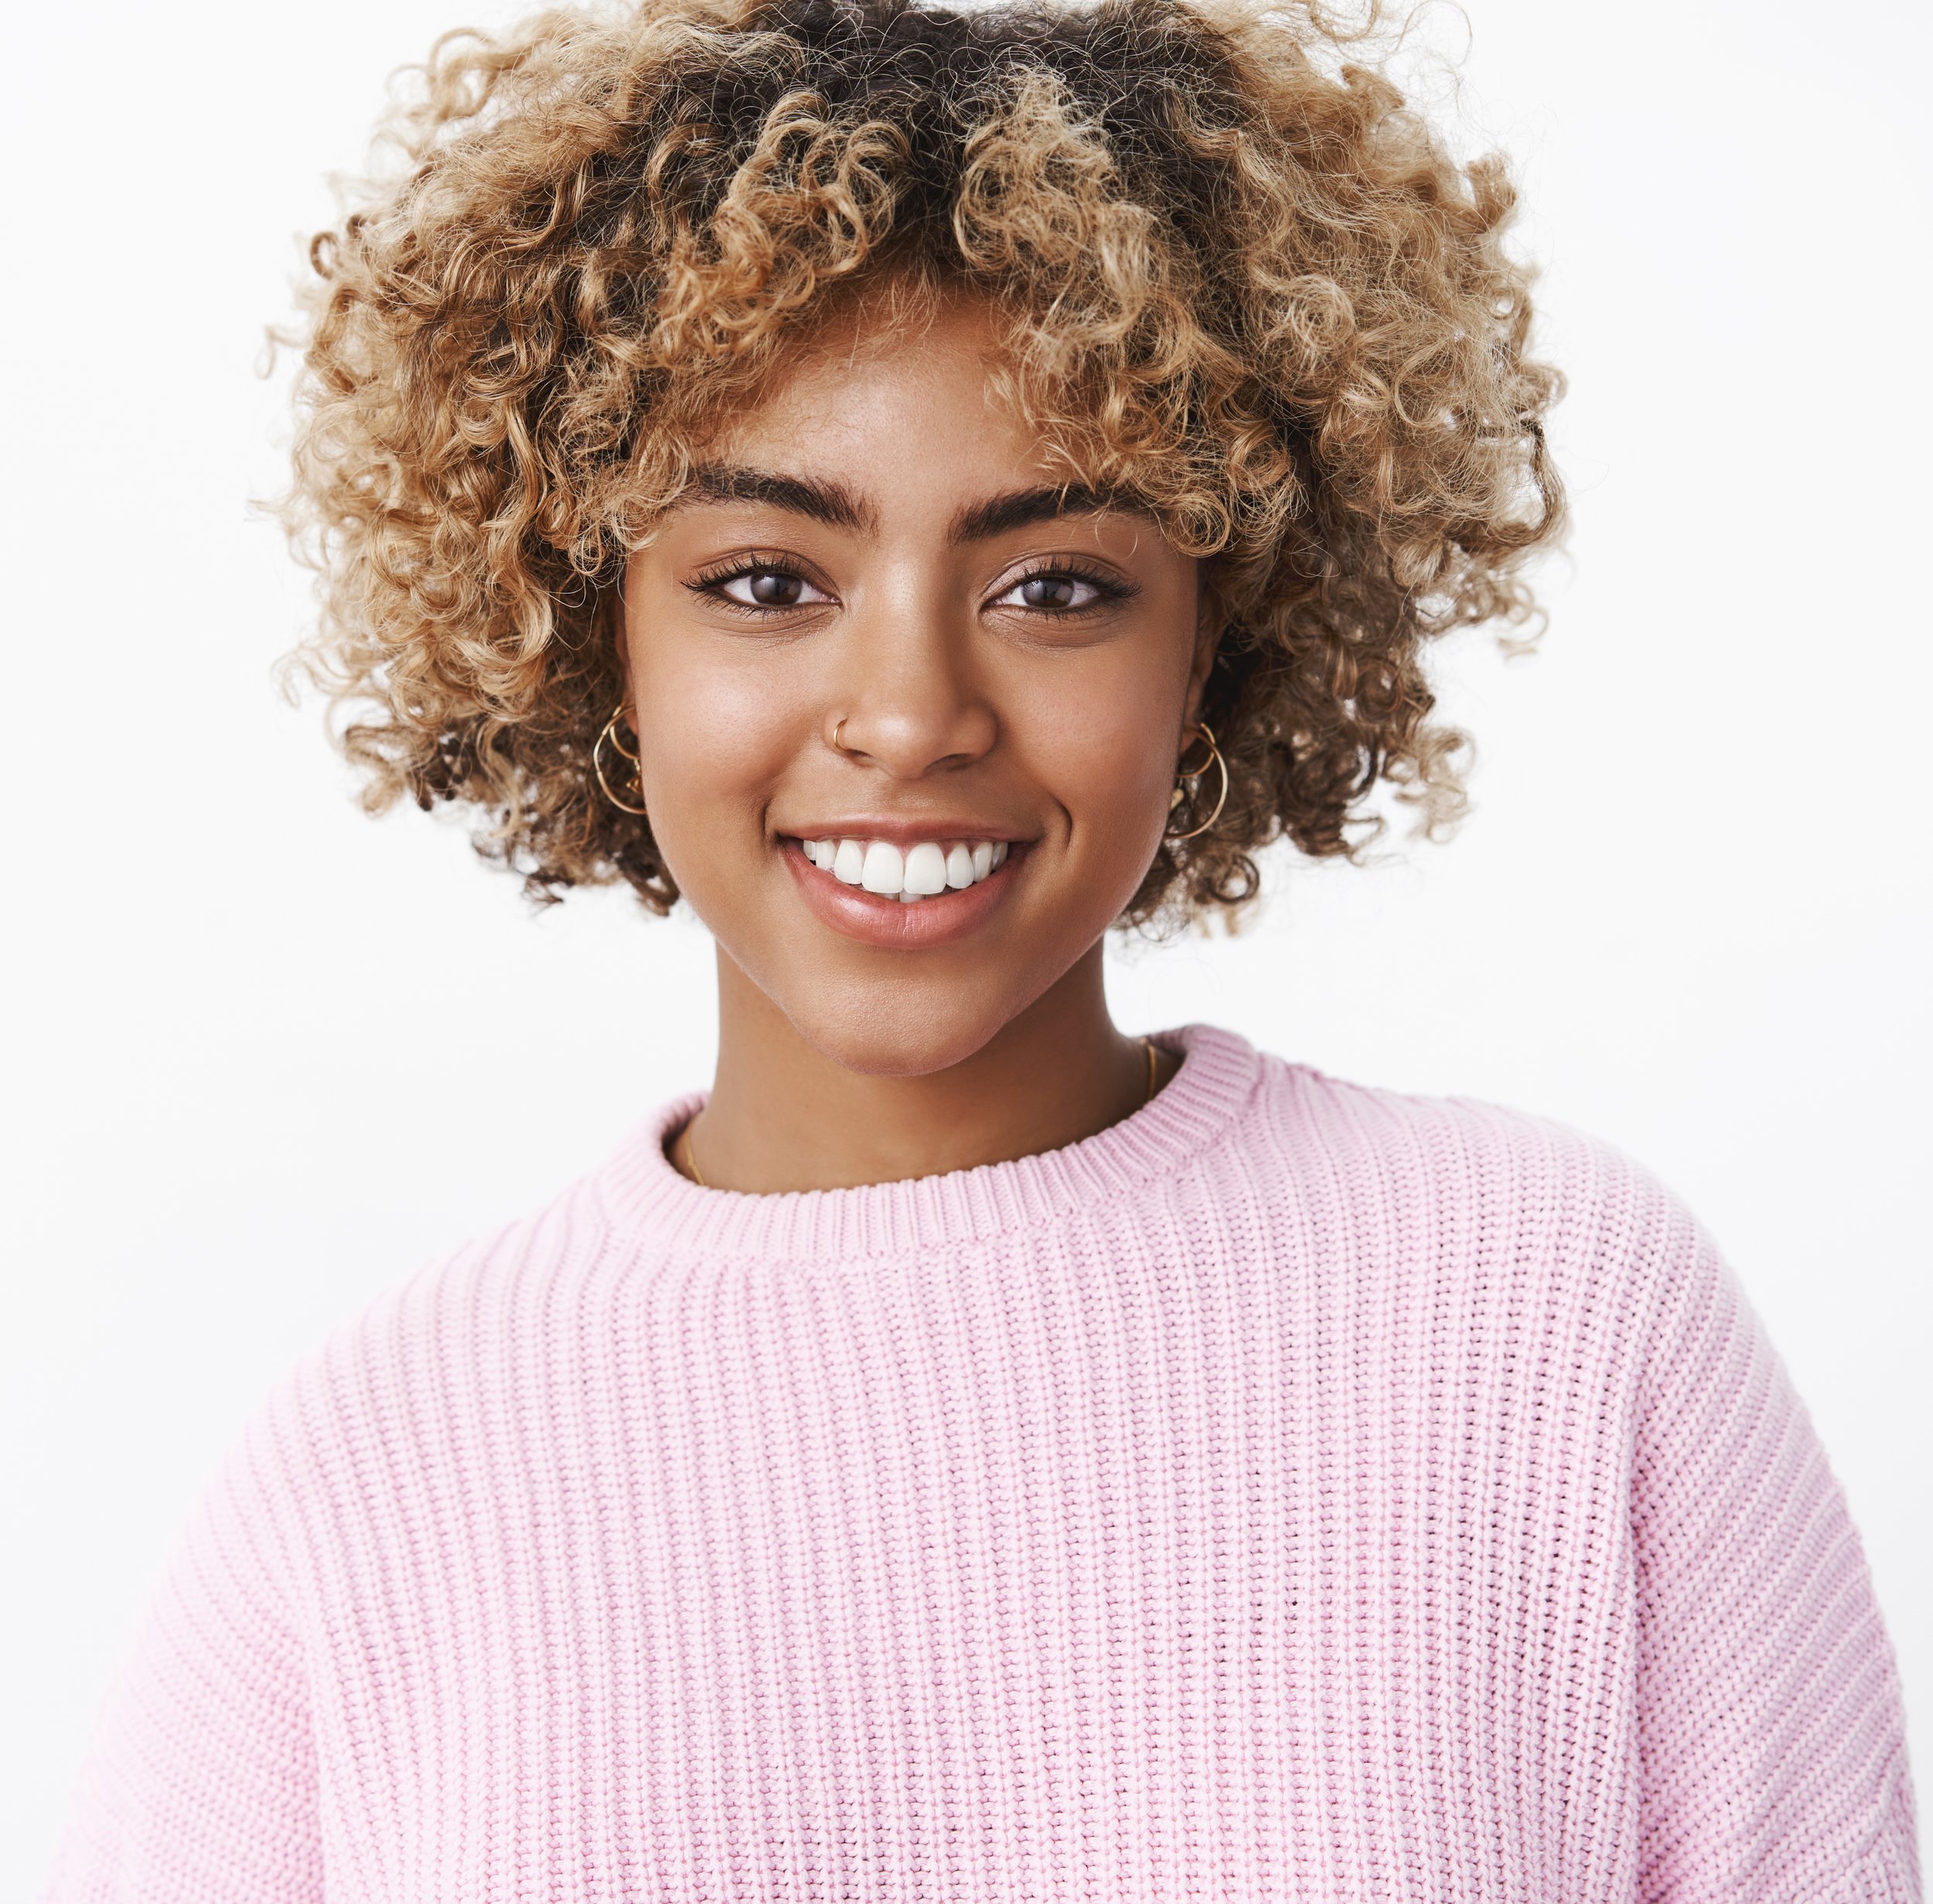 close-up-shot-charismatic-friendly-looking-happy-nice-dark-skinned-girl-with-pierced-nose-perfect-smile-standing-delighted-cute-white-wall-sweater-enjoying-family-holiday-dinner CROPPED.jpg